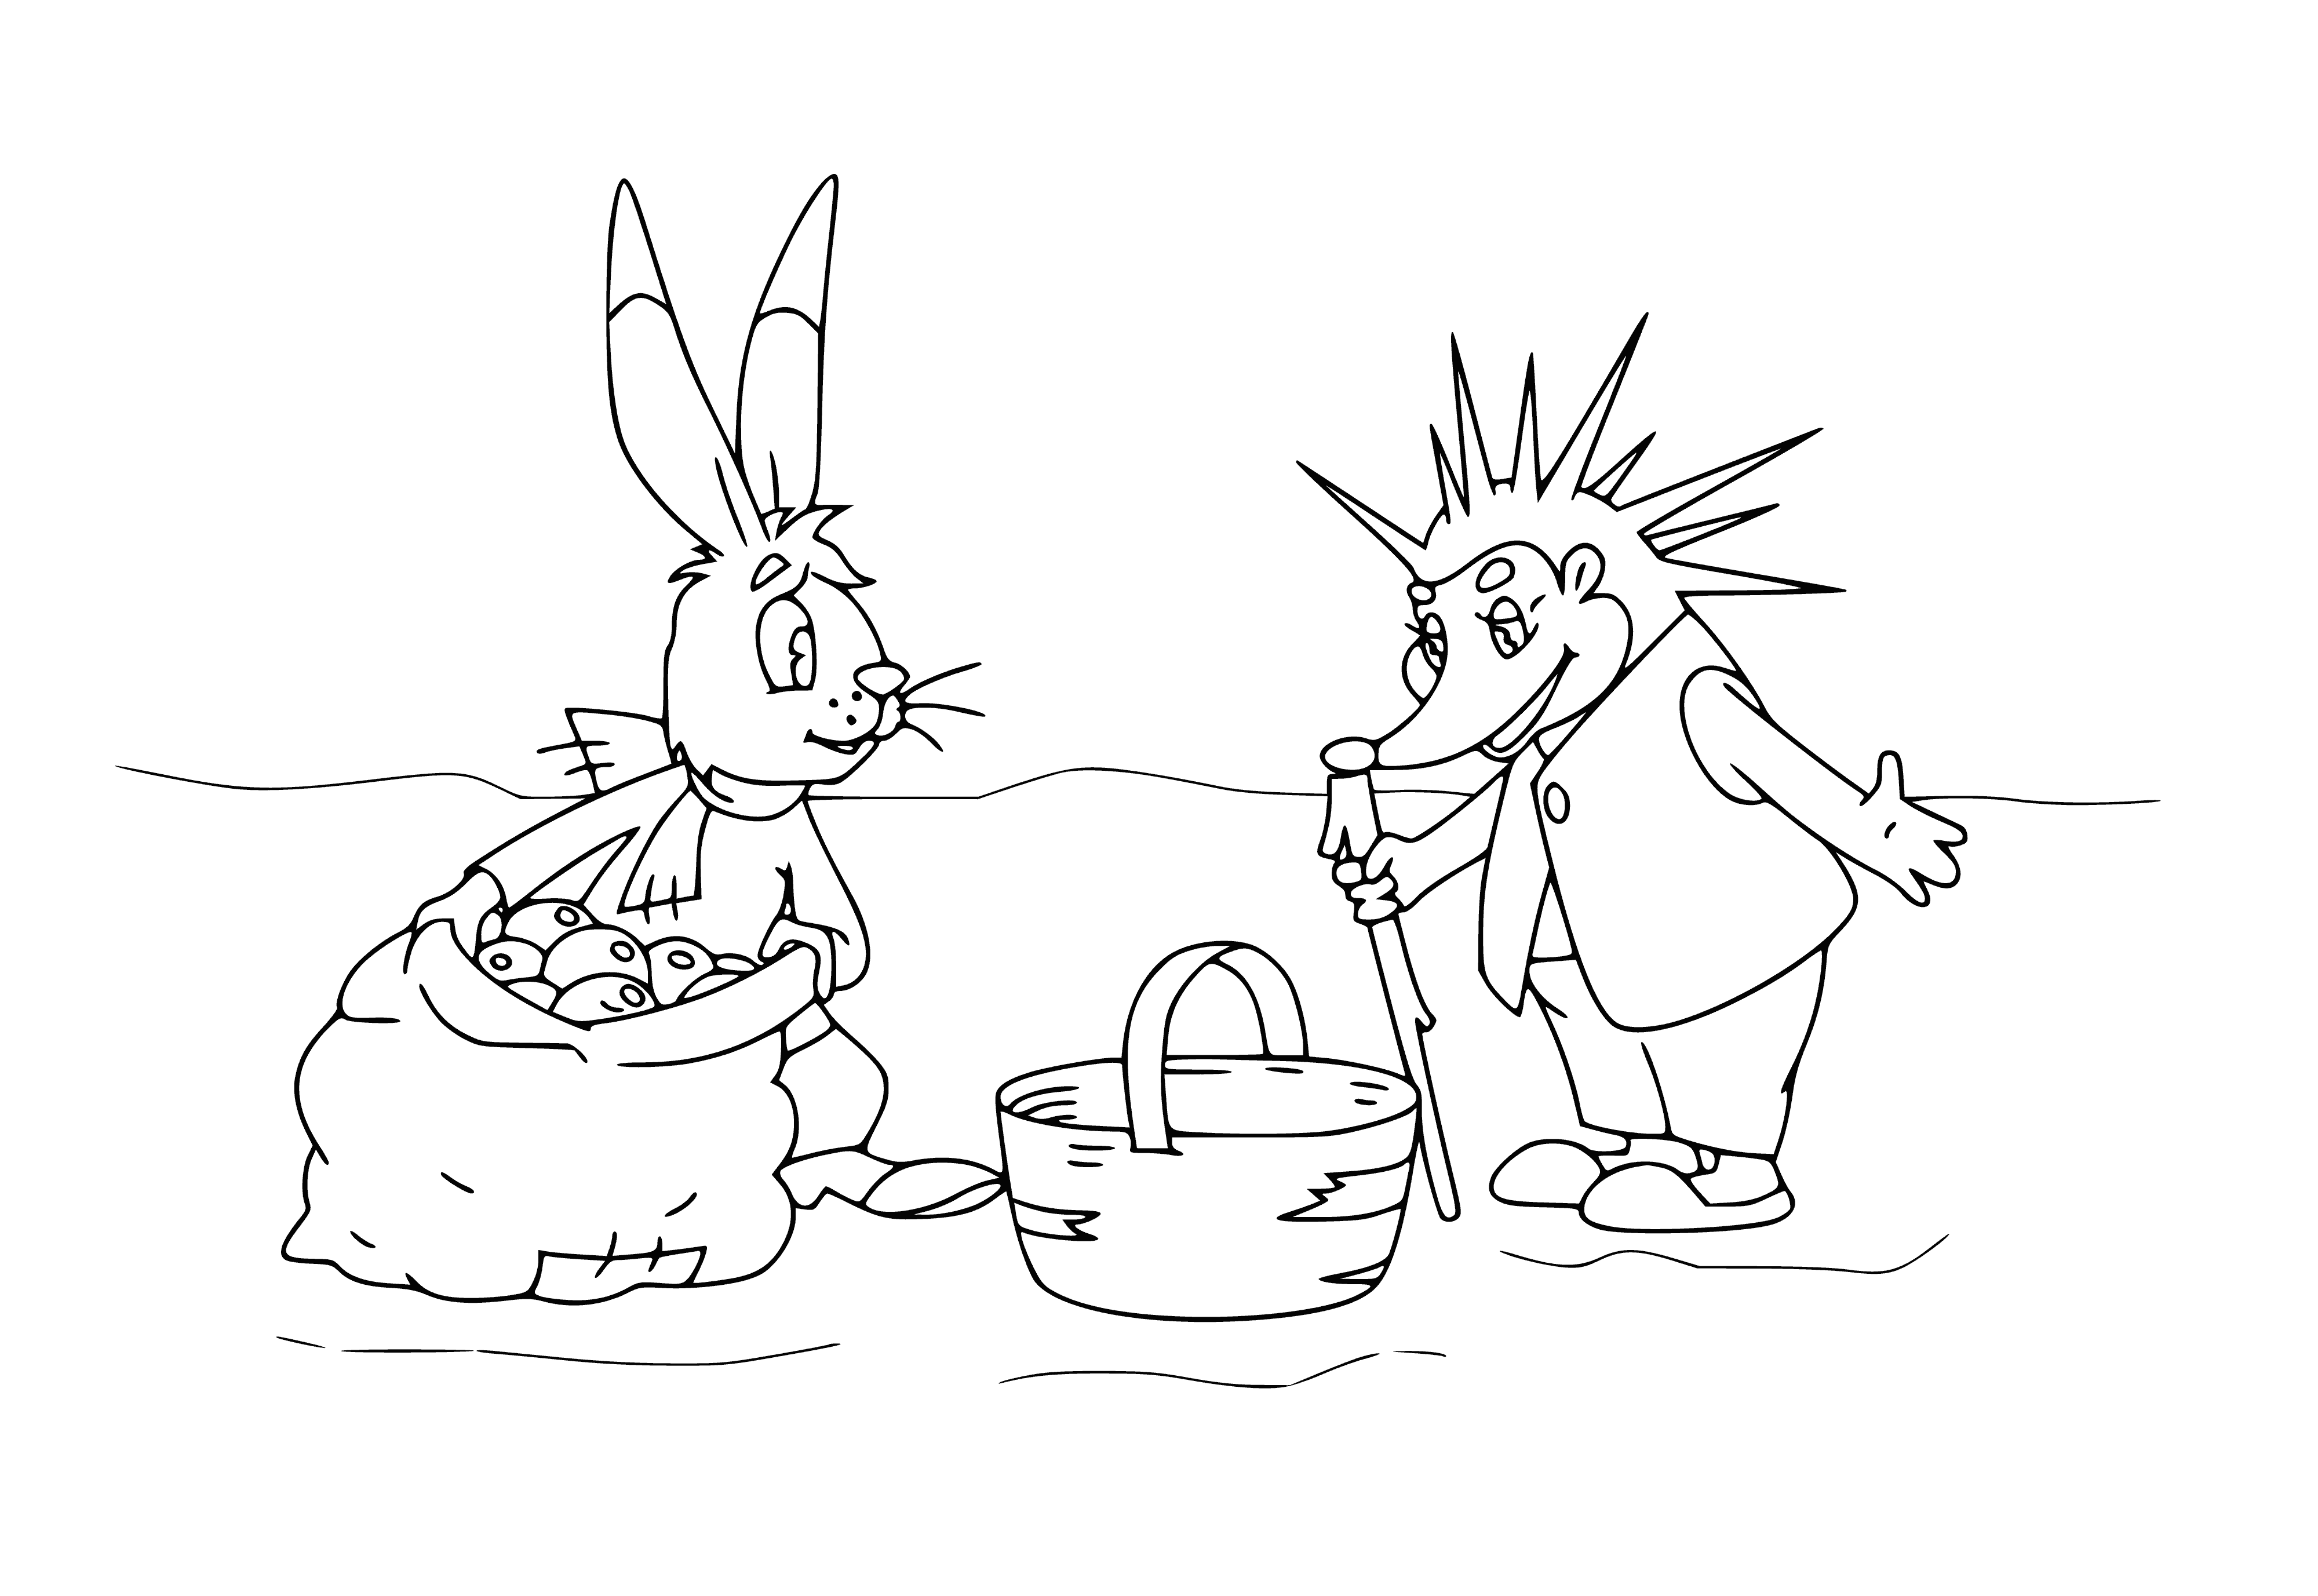 coloring page: A hare and hedgehog on a coloring page: the hare eating and the hedgehog holding an apple.